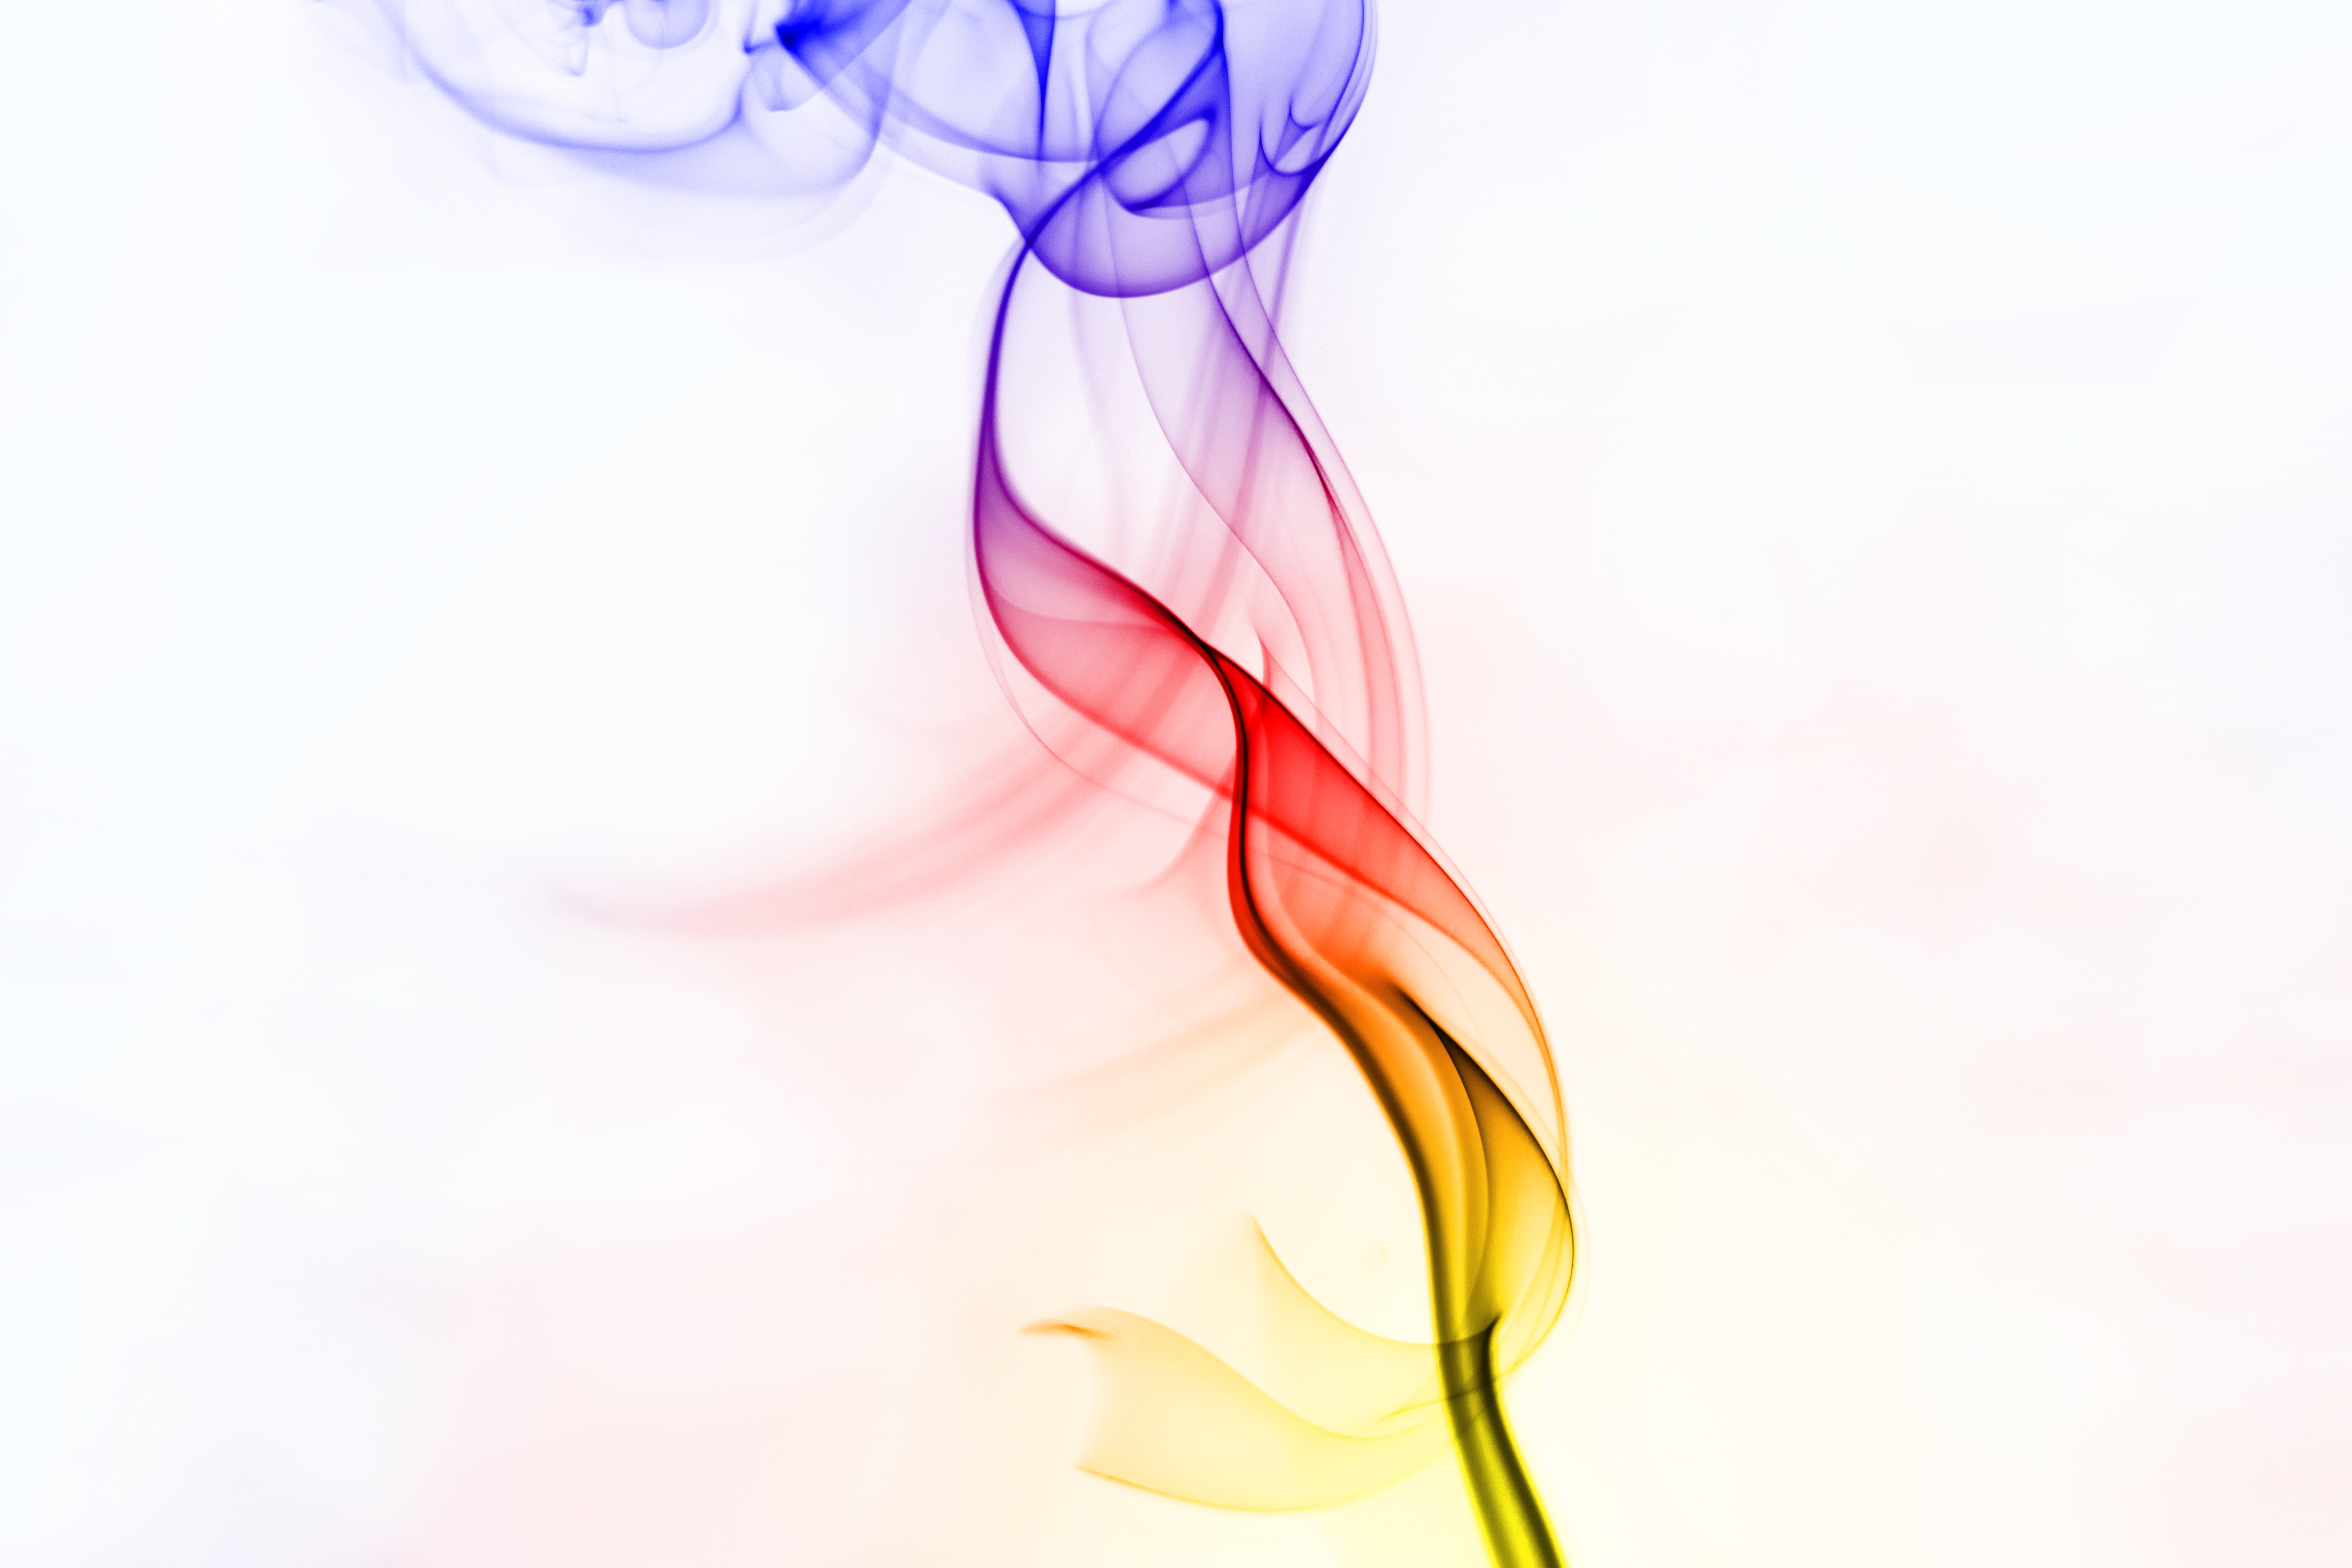 colourful, abstract, smoke, light, bright, light coloured, colorful, shroud